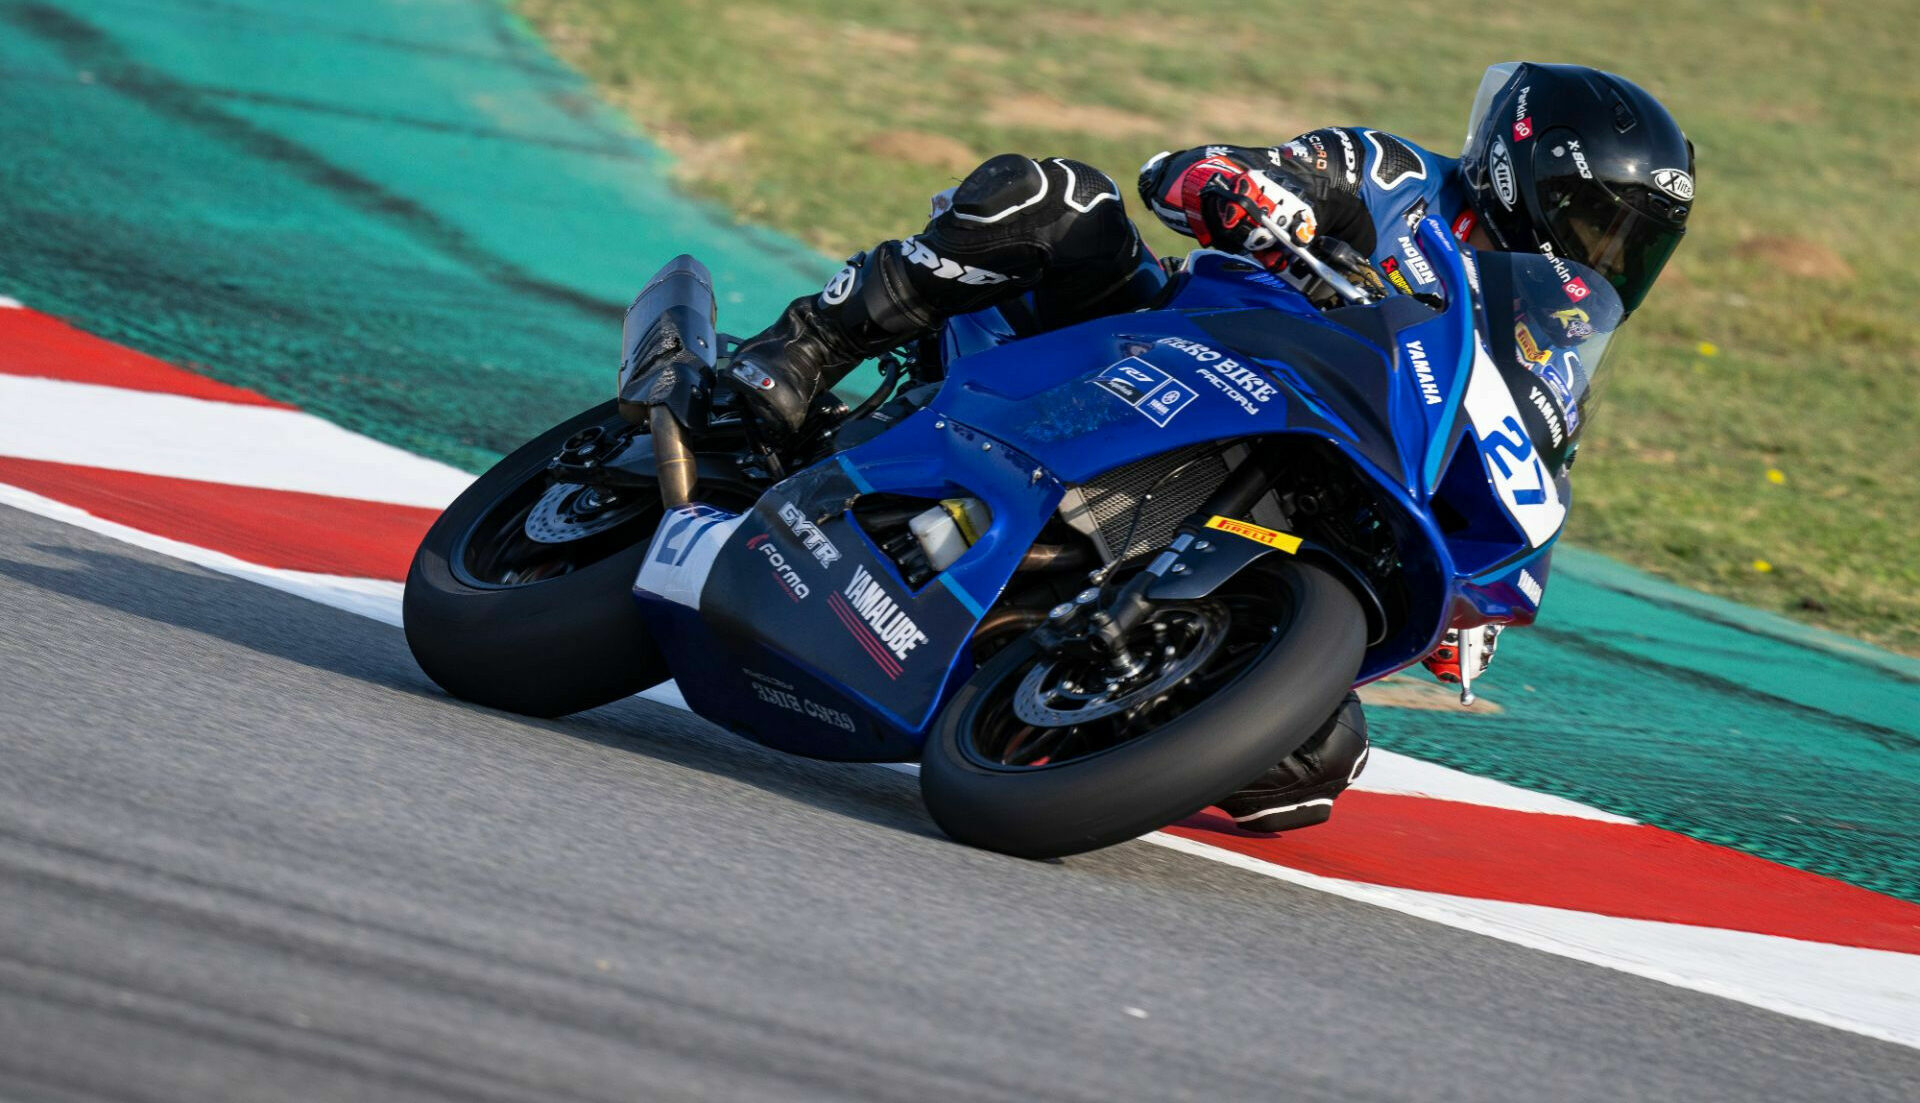 Filippo Rovelli (27) on his R7 Cup racebike in Europe. Photo courtesy Team Iso.